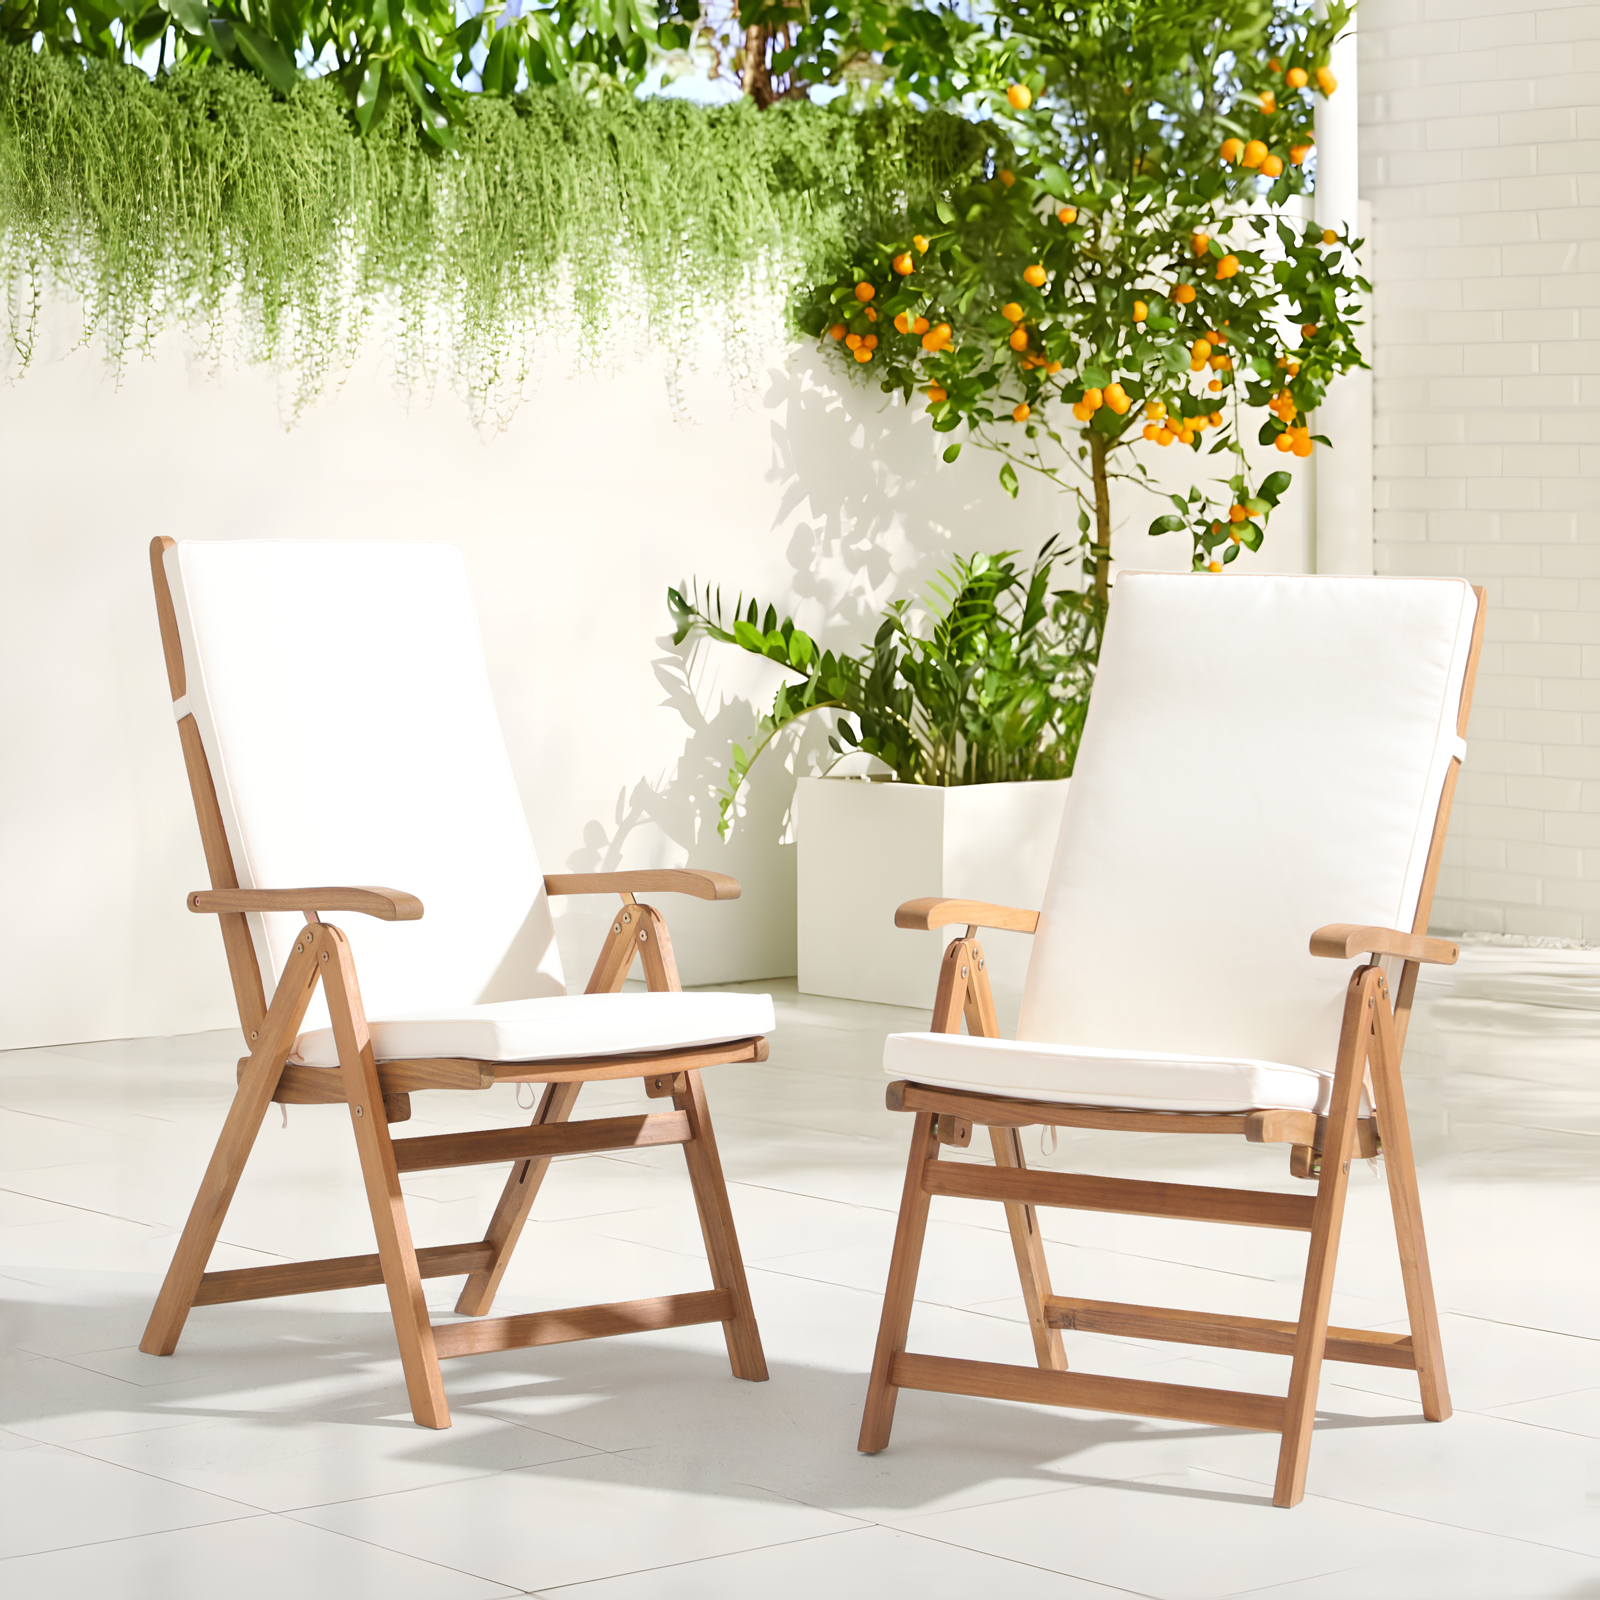 Folding Patio Dining Chair Set, Outdoor Acacia Wooden Reclining Chair, Set of 2, 2 Colors